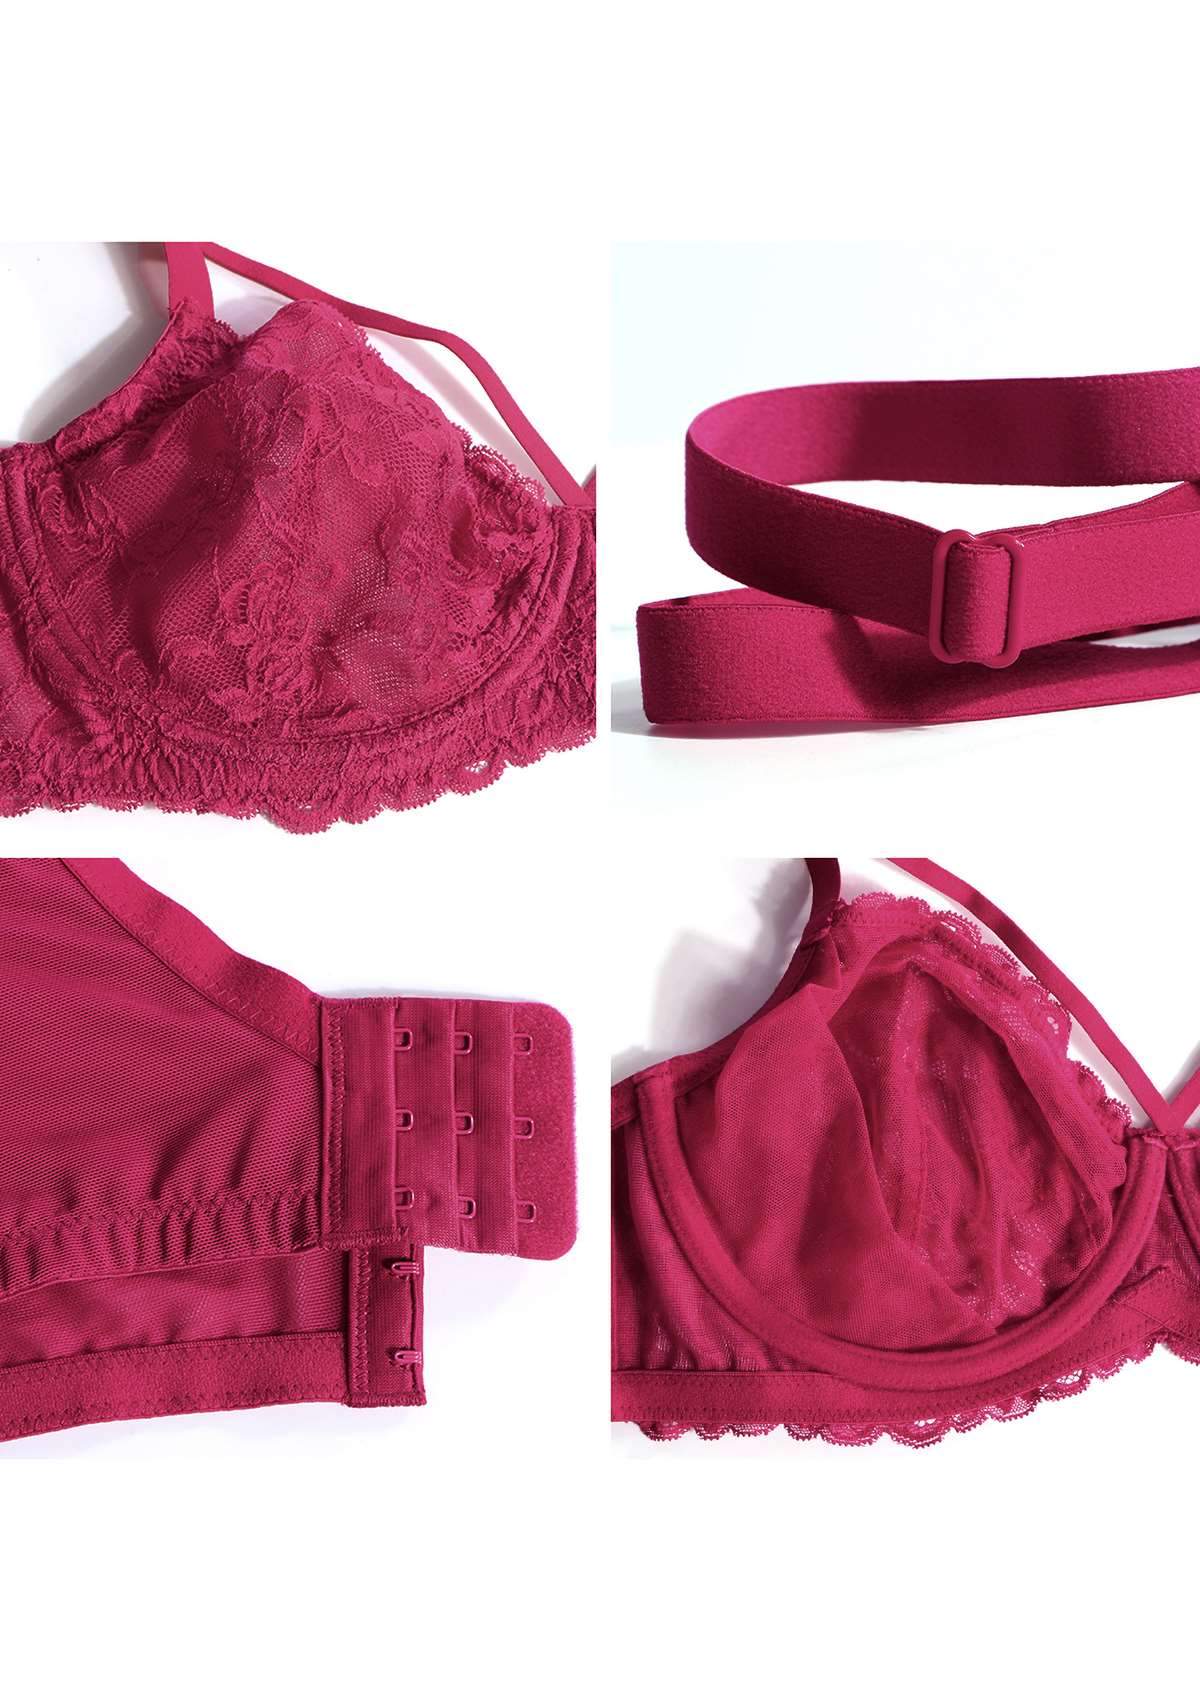 HSIA Pretty In Petals Sexy Lace Bra: Full Coverage Back Smoothing Bra - Red / 44 / I